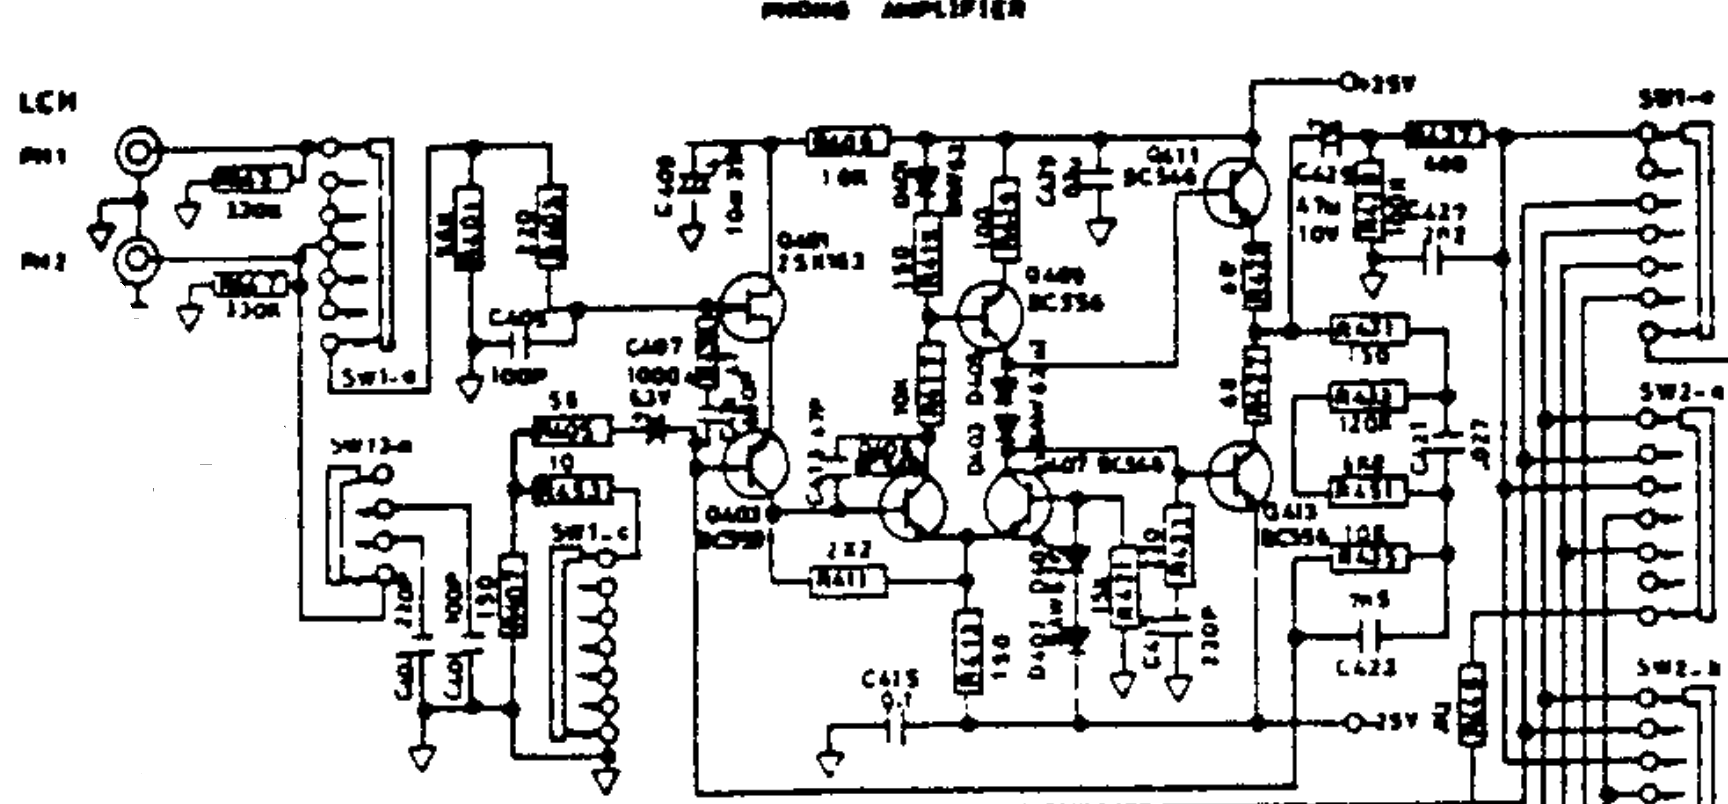 NAD 3140 Schematic.png